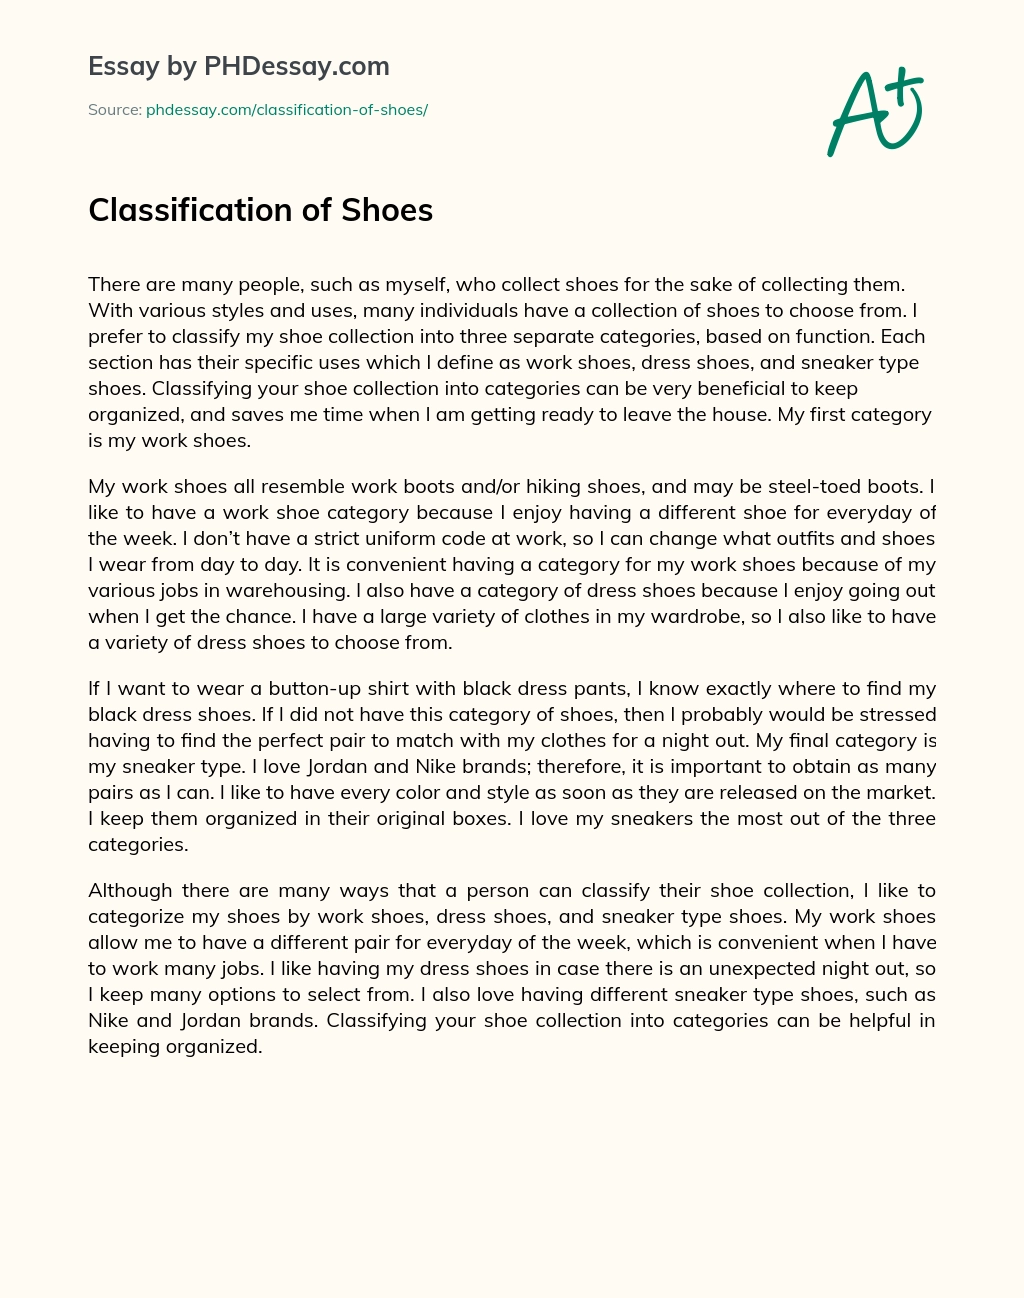 Classification of Shoes essay